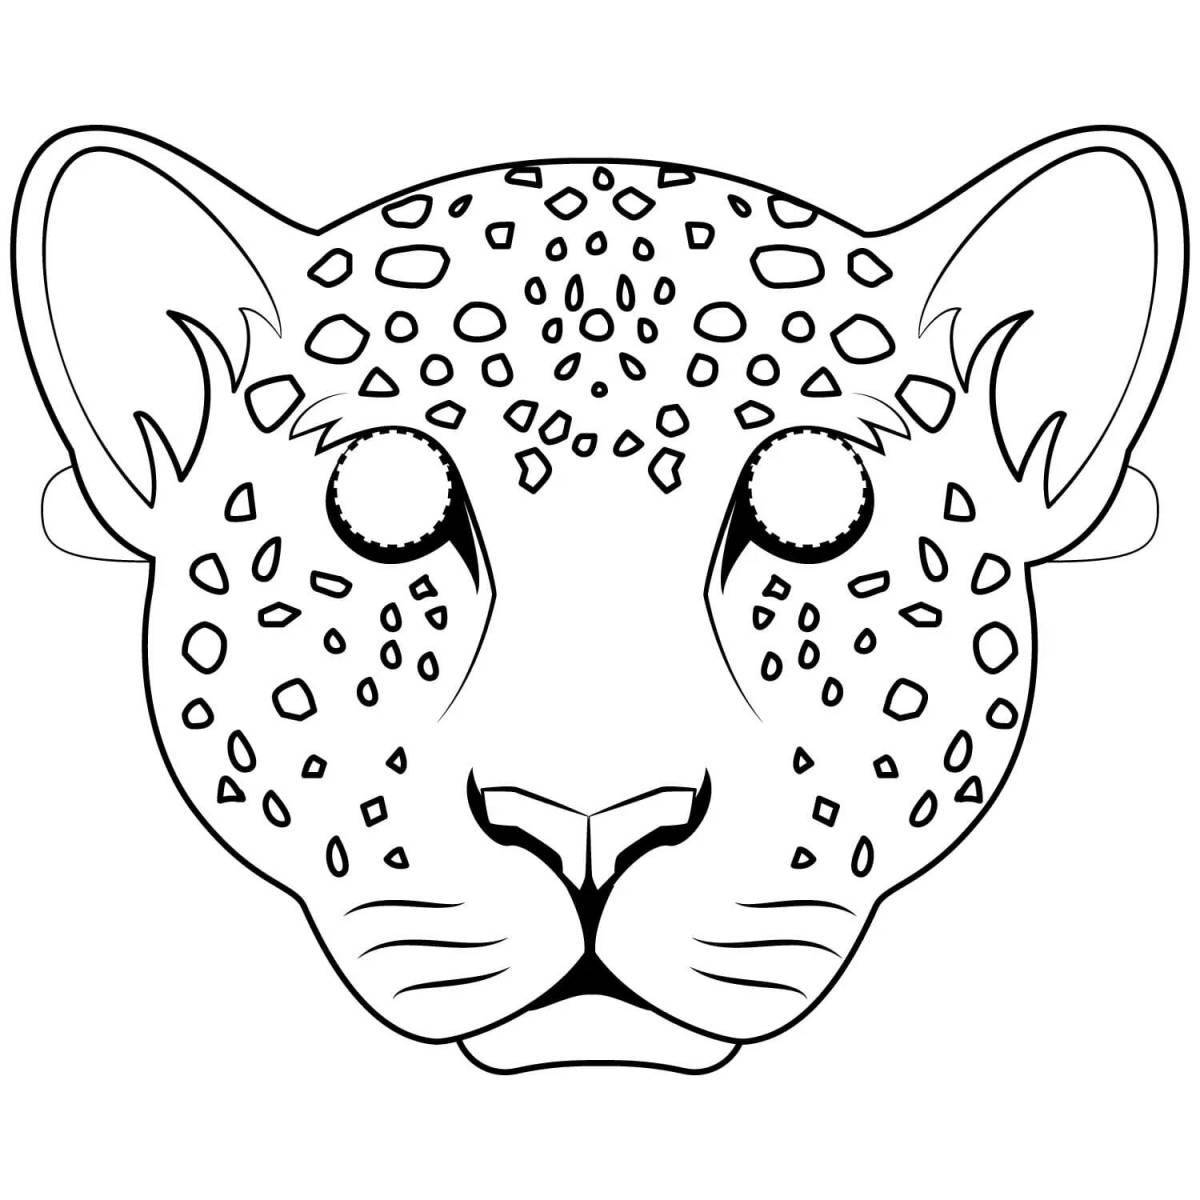 Colorful animal mask coloring pages for kids